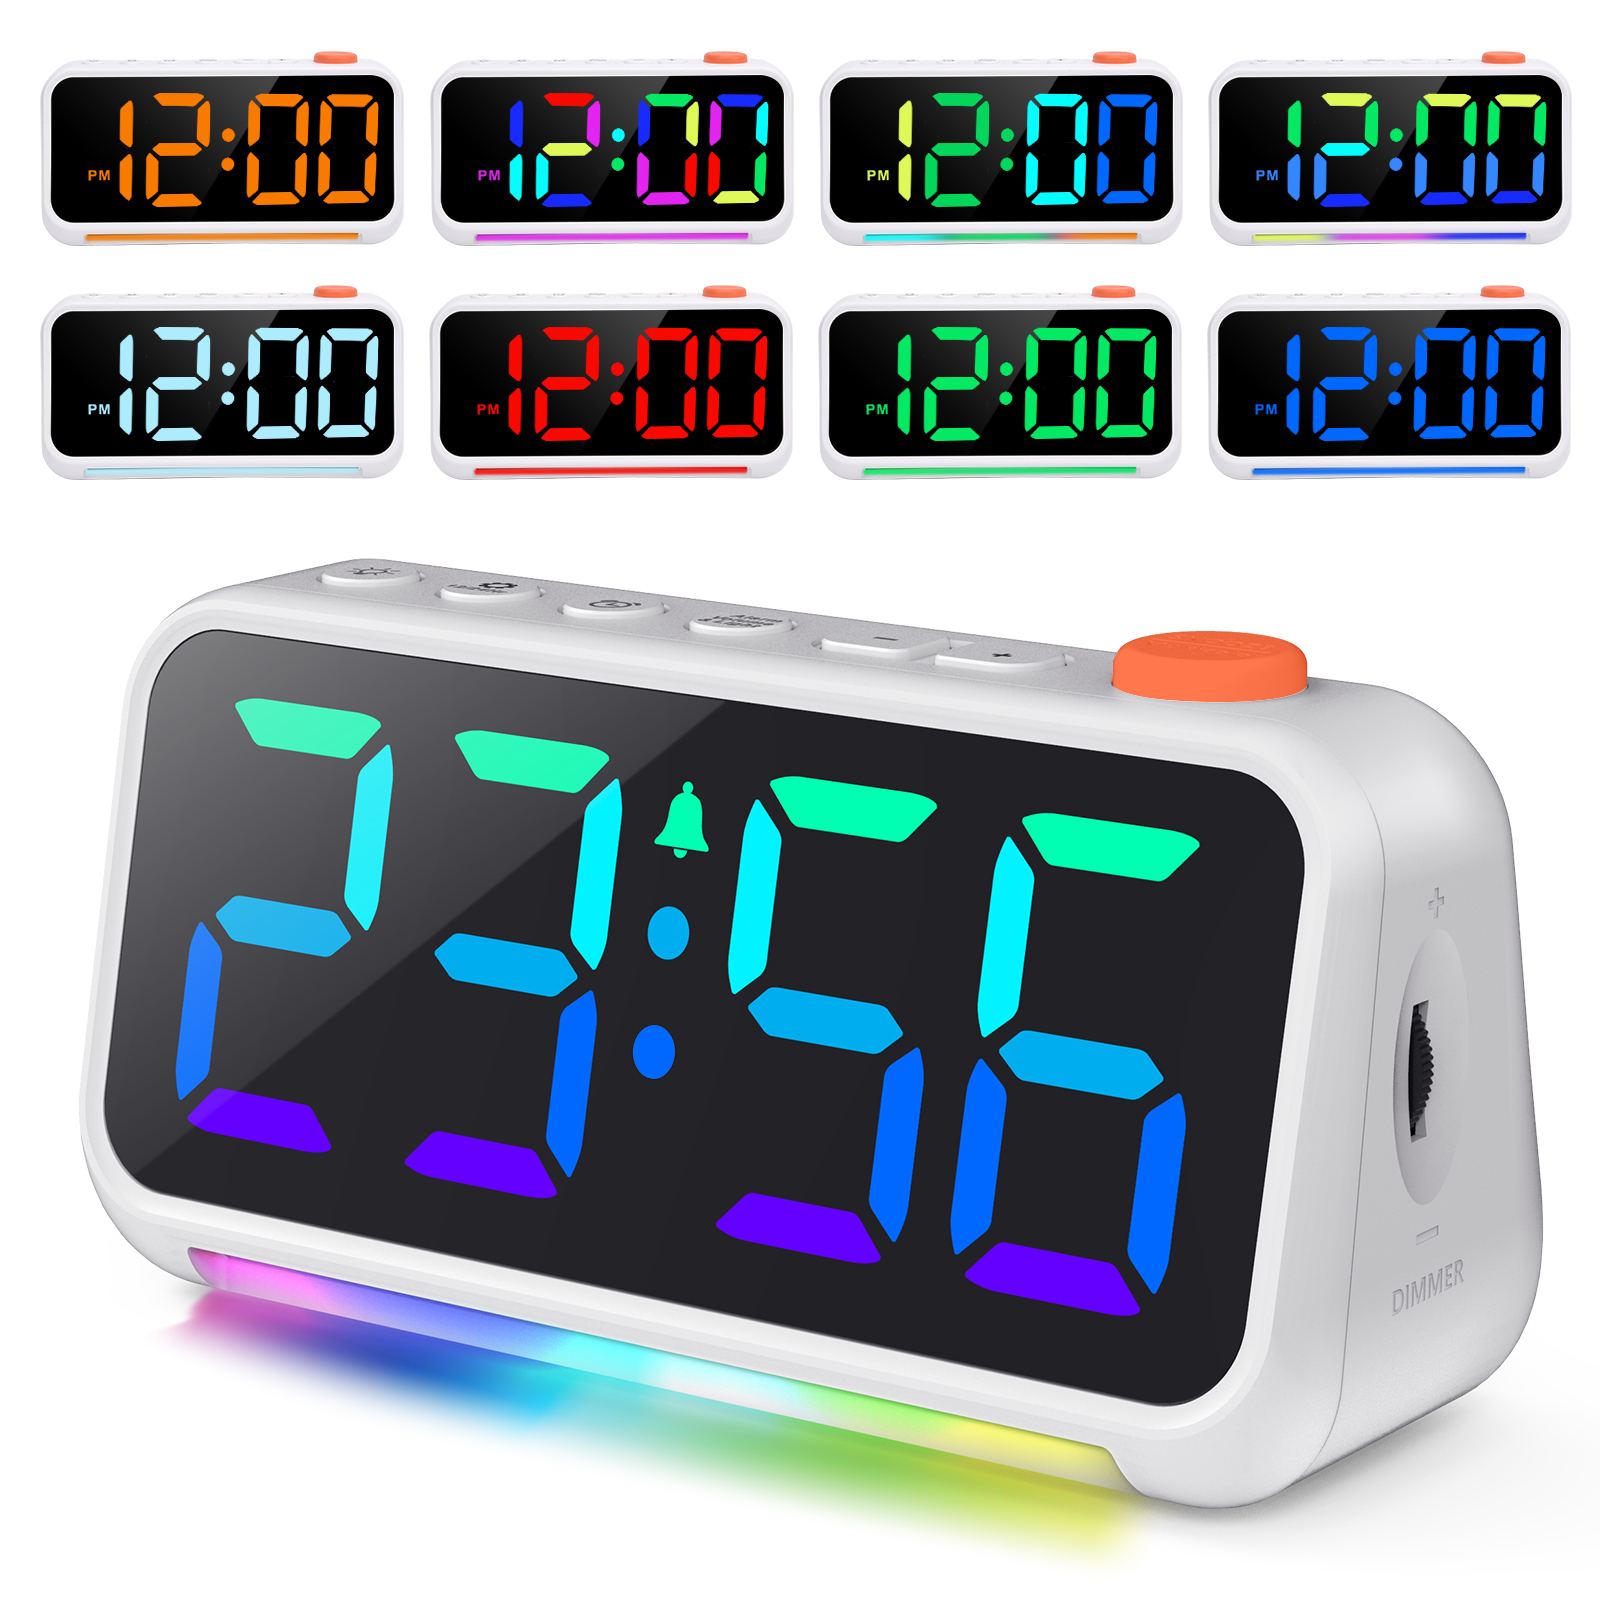 PERSUPER Alarm Clock Digital Clock, Super Loud Alarm Clock for Heavy Sleepers Adults/Teens/Kids, RGB Colorful LED Display Dynamic Clock with Snooze, Atmosphere Light, USB Charger for Bedroom, Bedside